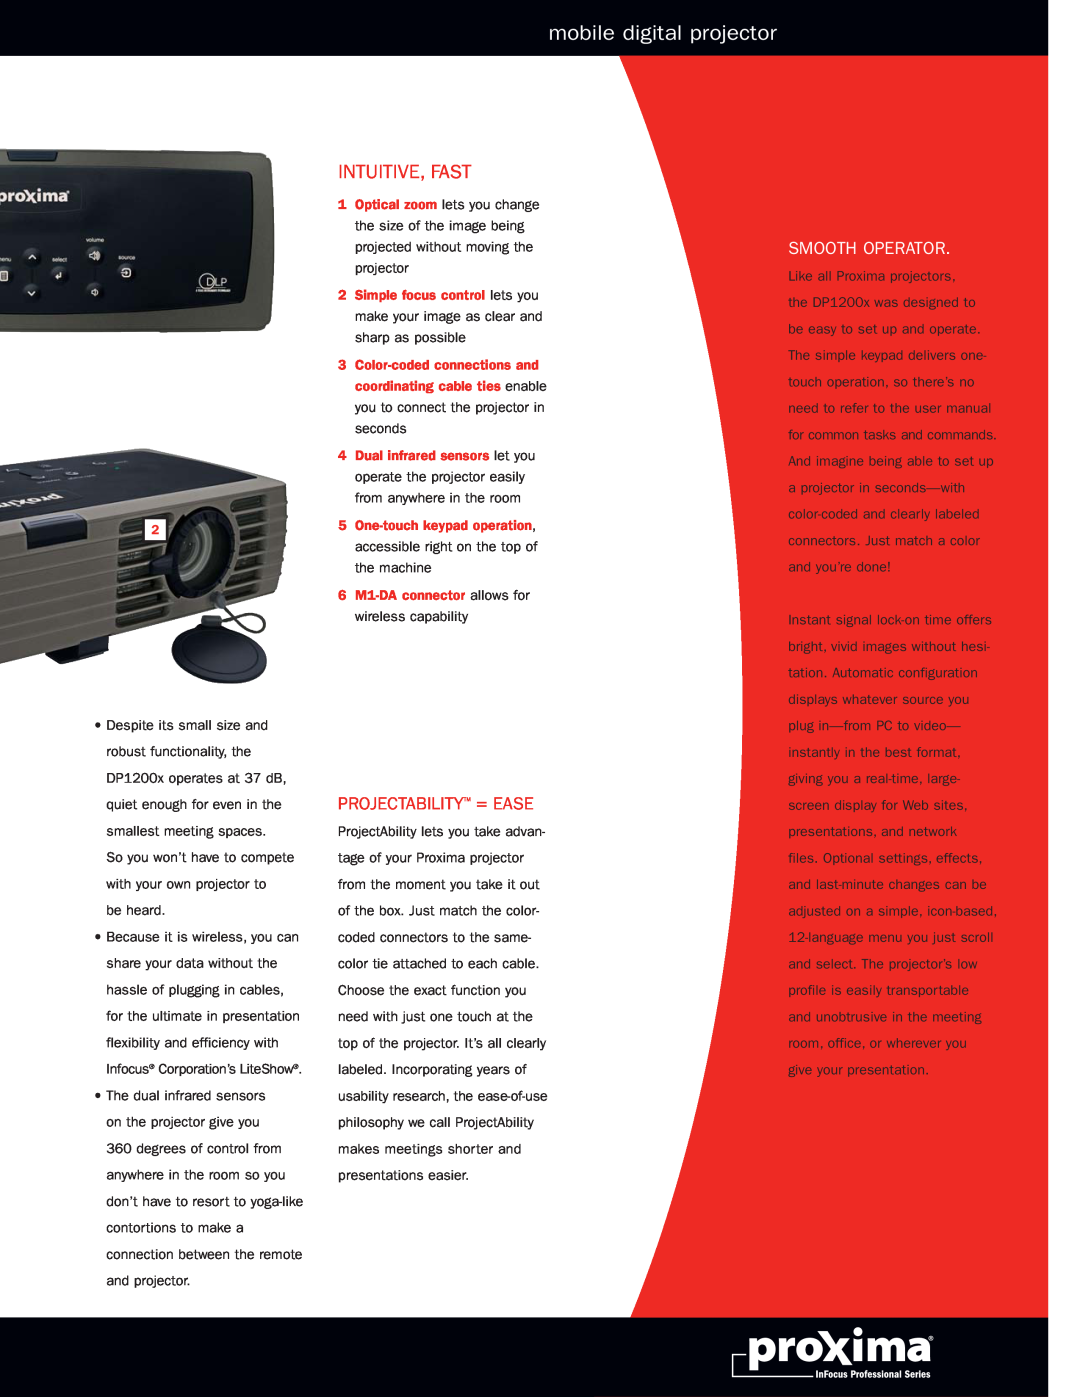 Proxima ASA DP1200x manual mobile digital projector, Projectability = Ease, Intuitive, Fast, Smooth Operator 